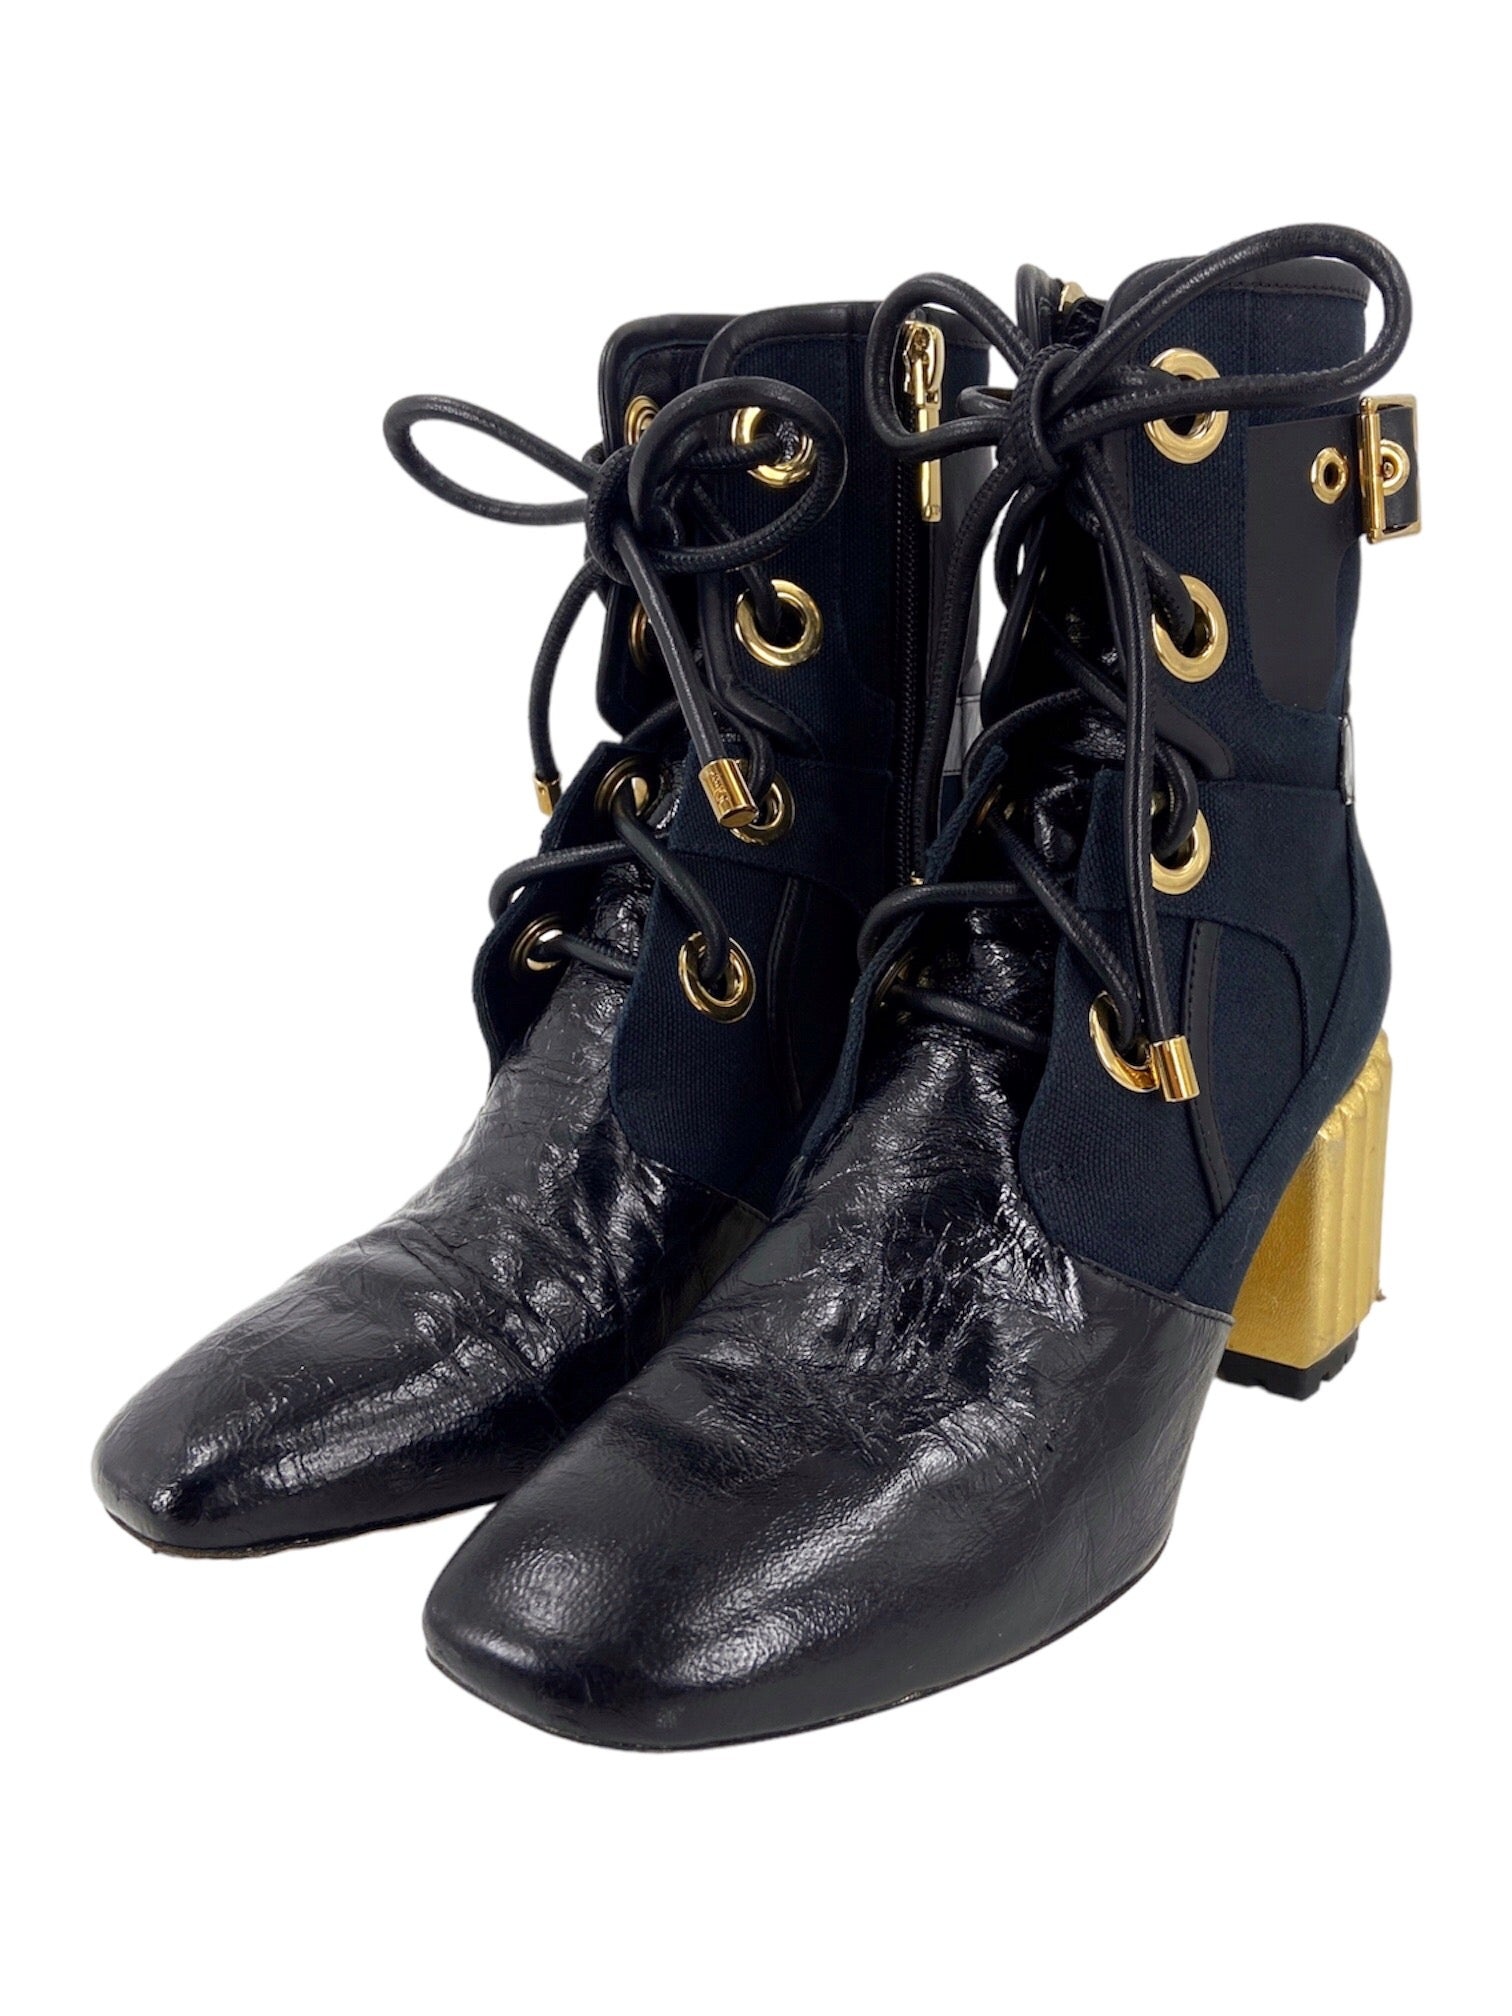 Christian Dior 2017 Glorious Belted Lambskin Leather Boots 37 - 1